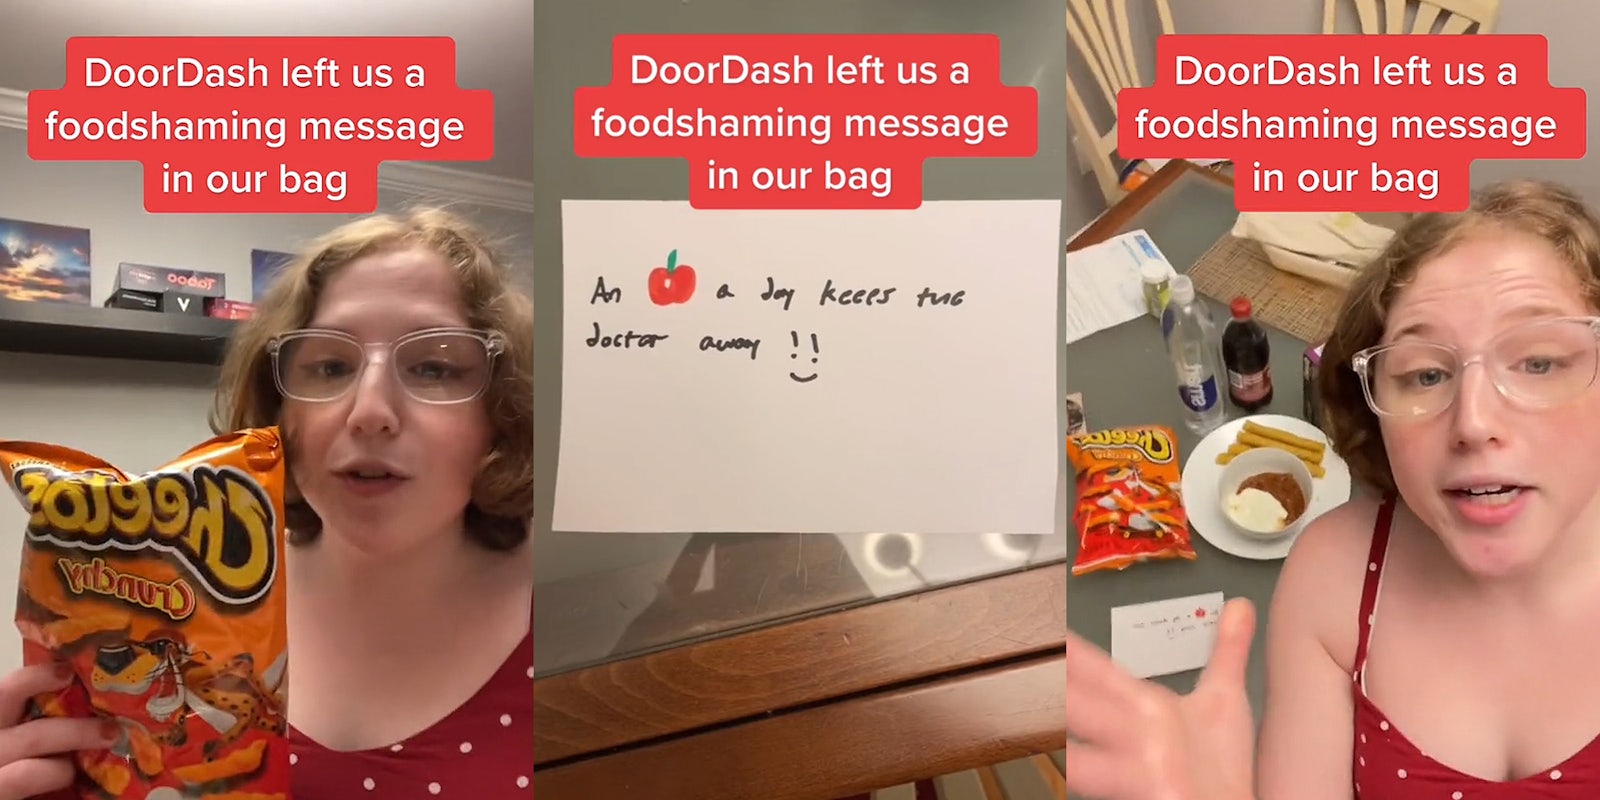 woman holding bag of Cheetos caption 'DoorDash left us a foodshaming message in our bag' (l) note written on index card on wood and glass table 'An (apple drawing) a day keeps the doctor away !! (smile emoji)' caption'DoorDash left us a foodshaming message in our bag' (c) woman speaking with hand out next to wood and glass table with note and food caption 'DoorDash left us a foodshaming message in our bag' (r)